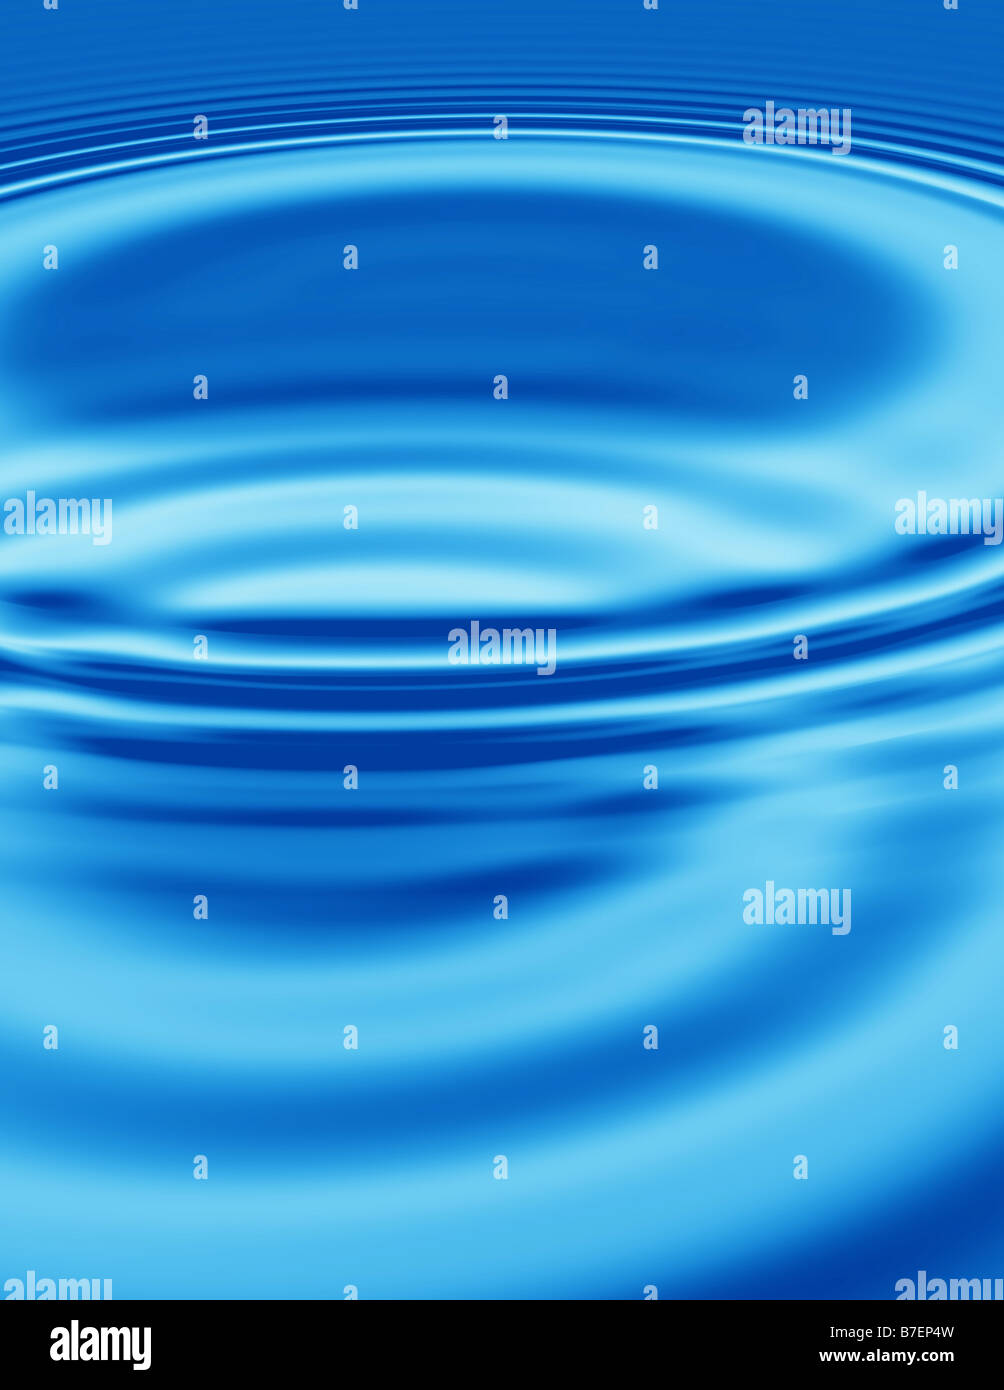 abstract blue water ripple background Stock Photo